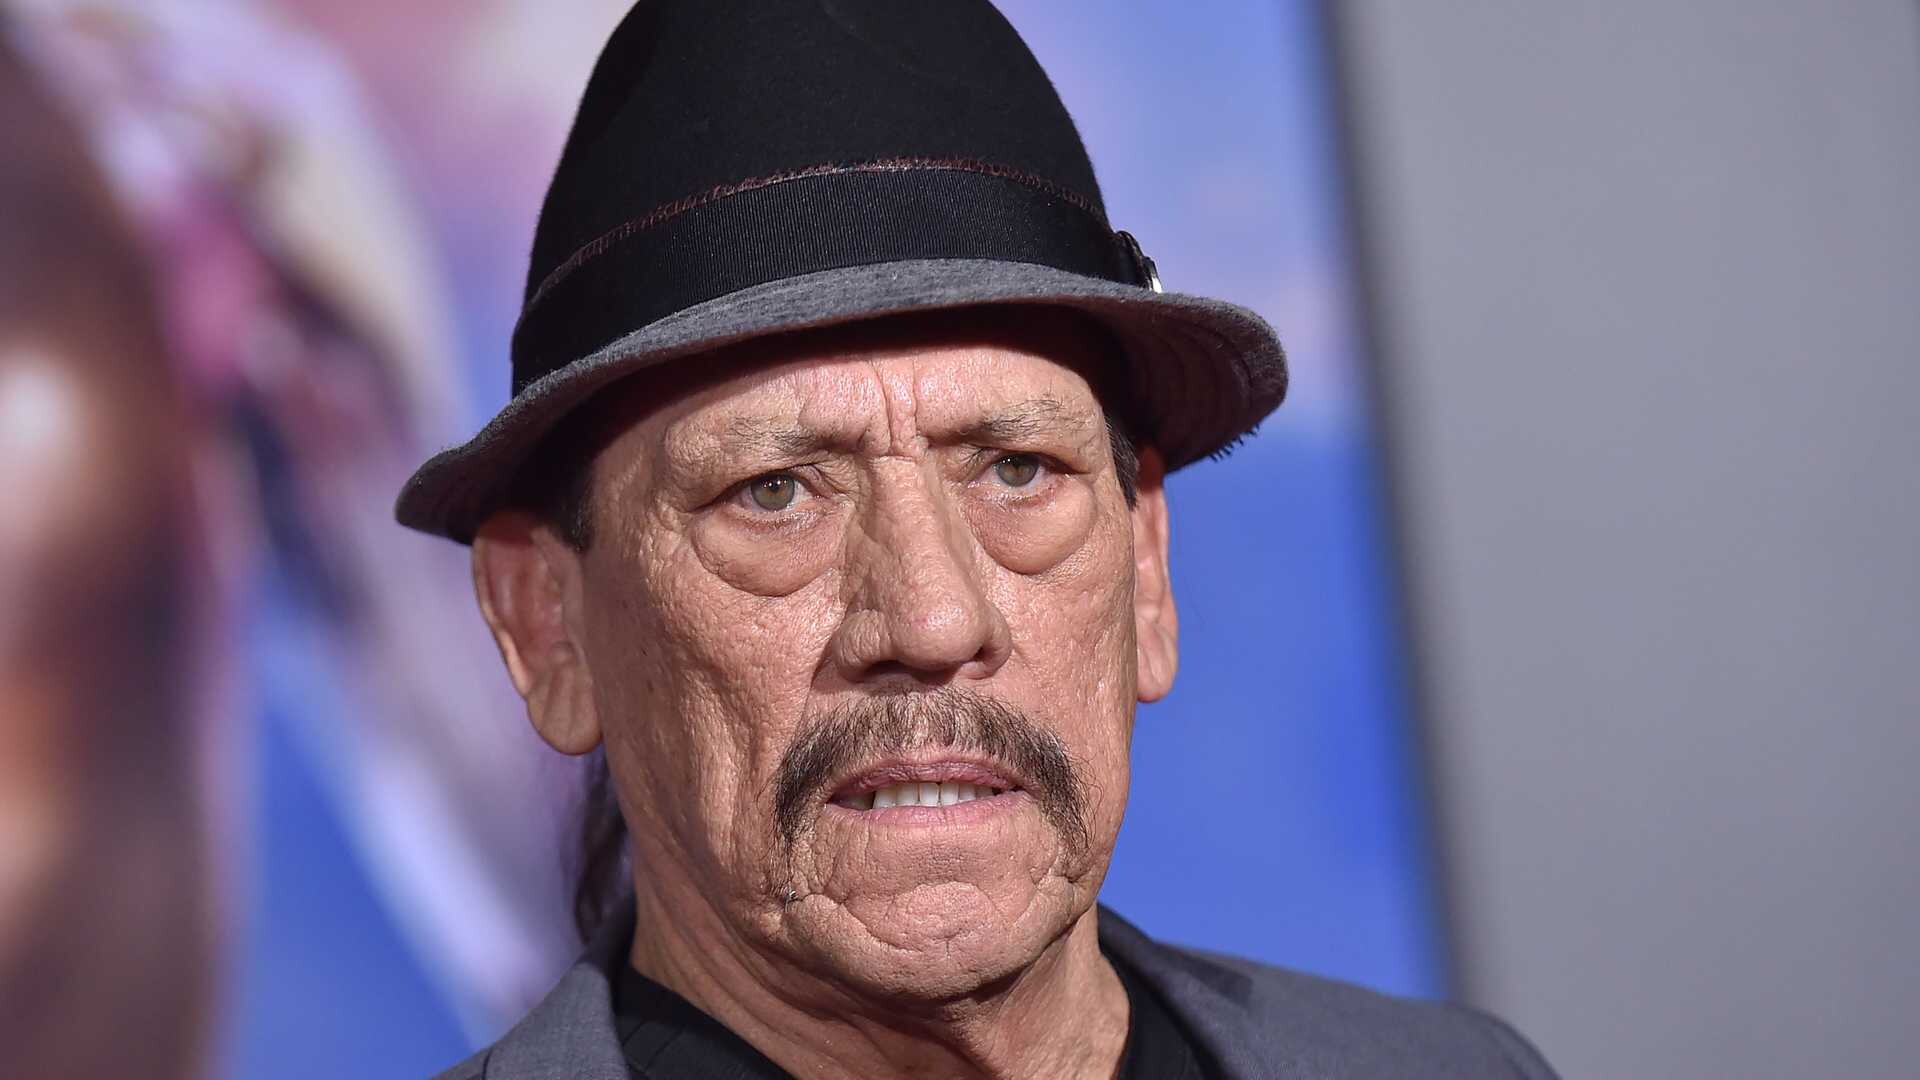 Danny Trejo: A distinctive appearance, Heavily lined face, A potential lead actor in action films. 1920x1080 Full HD Background.